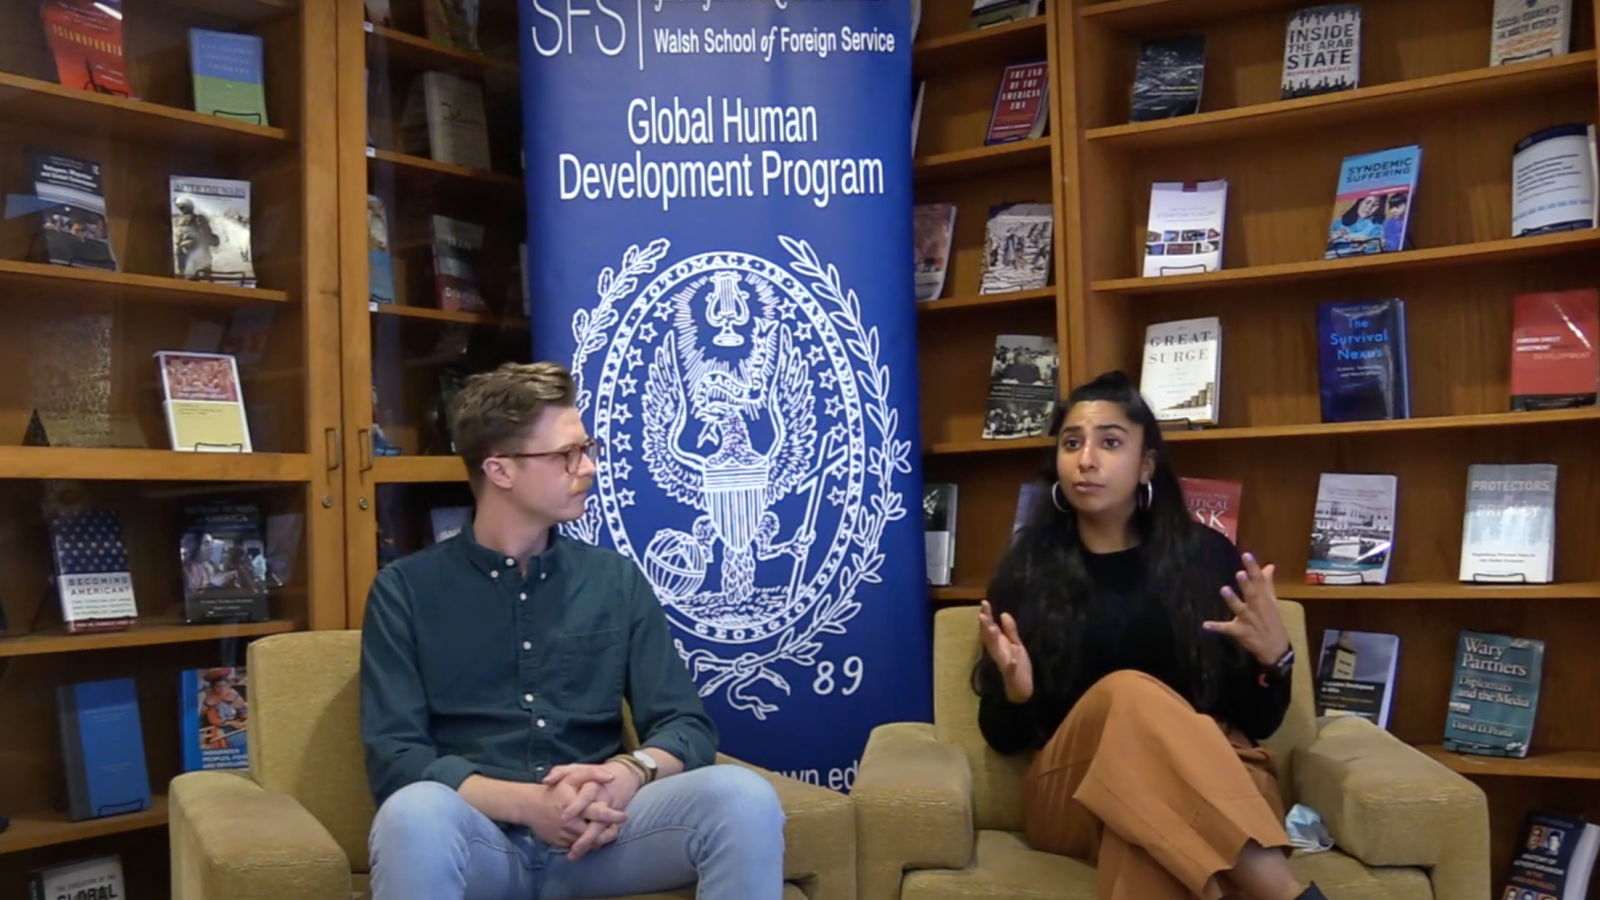 Bradley and Shirin sitting in a library in front of a GHD poster